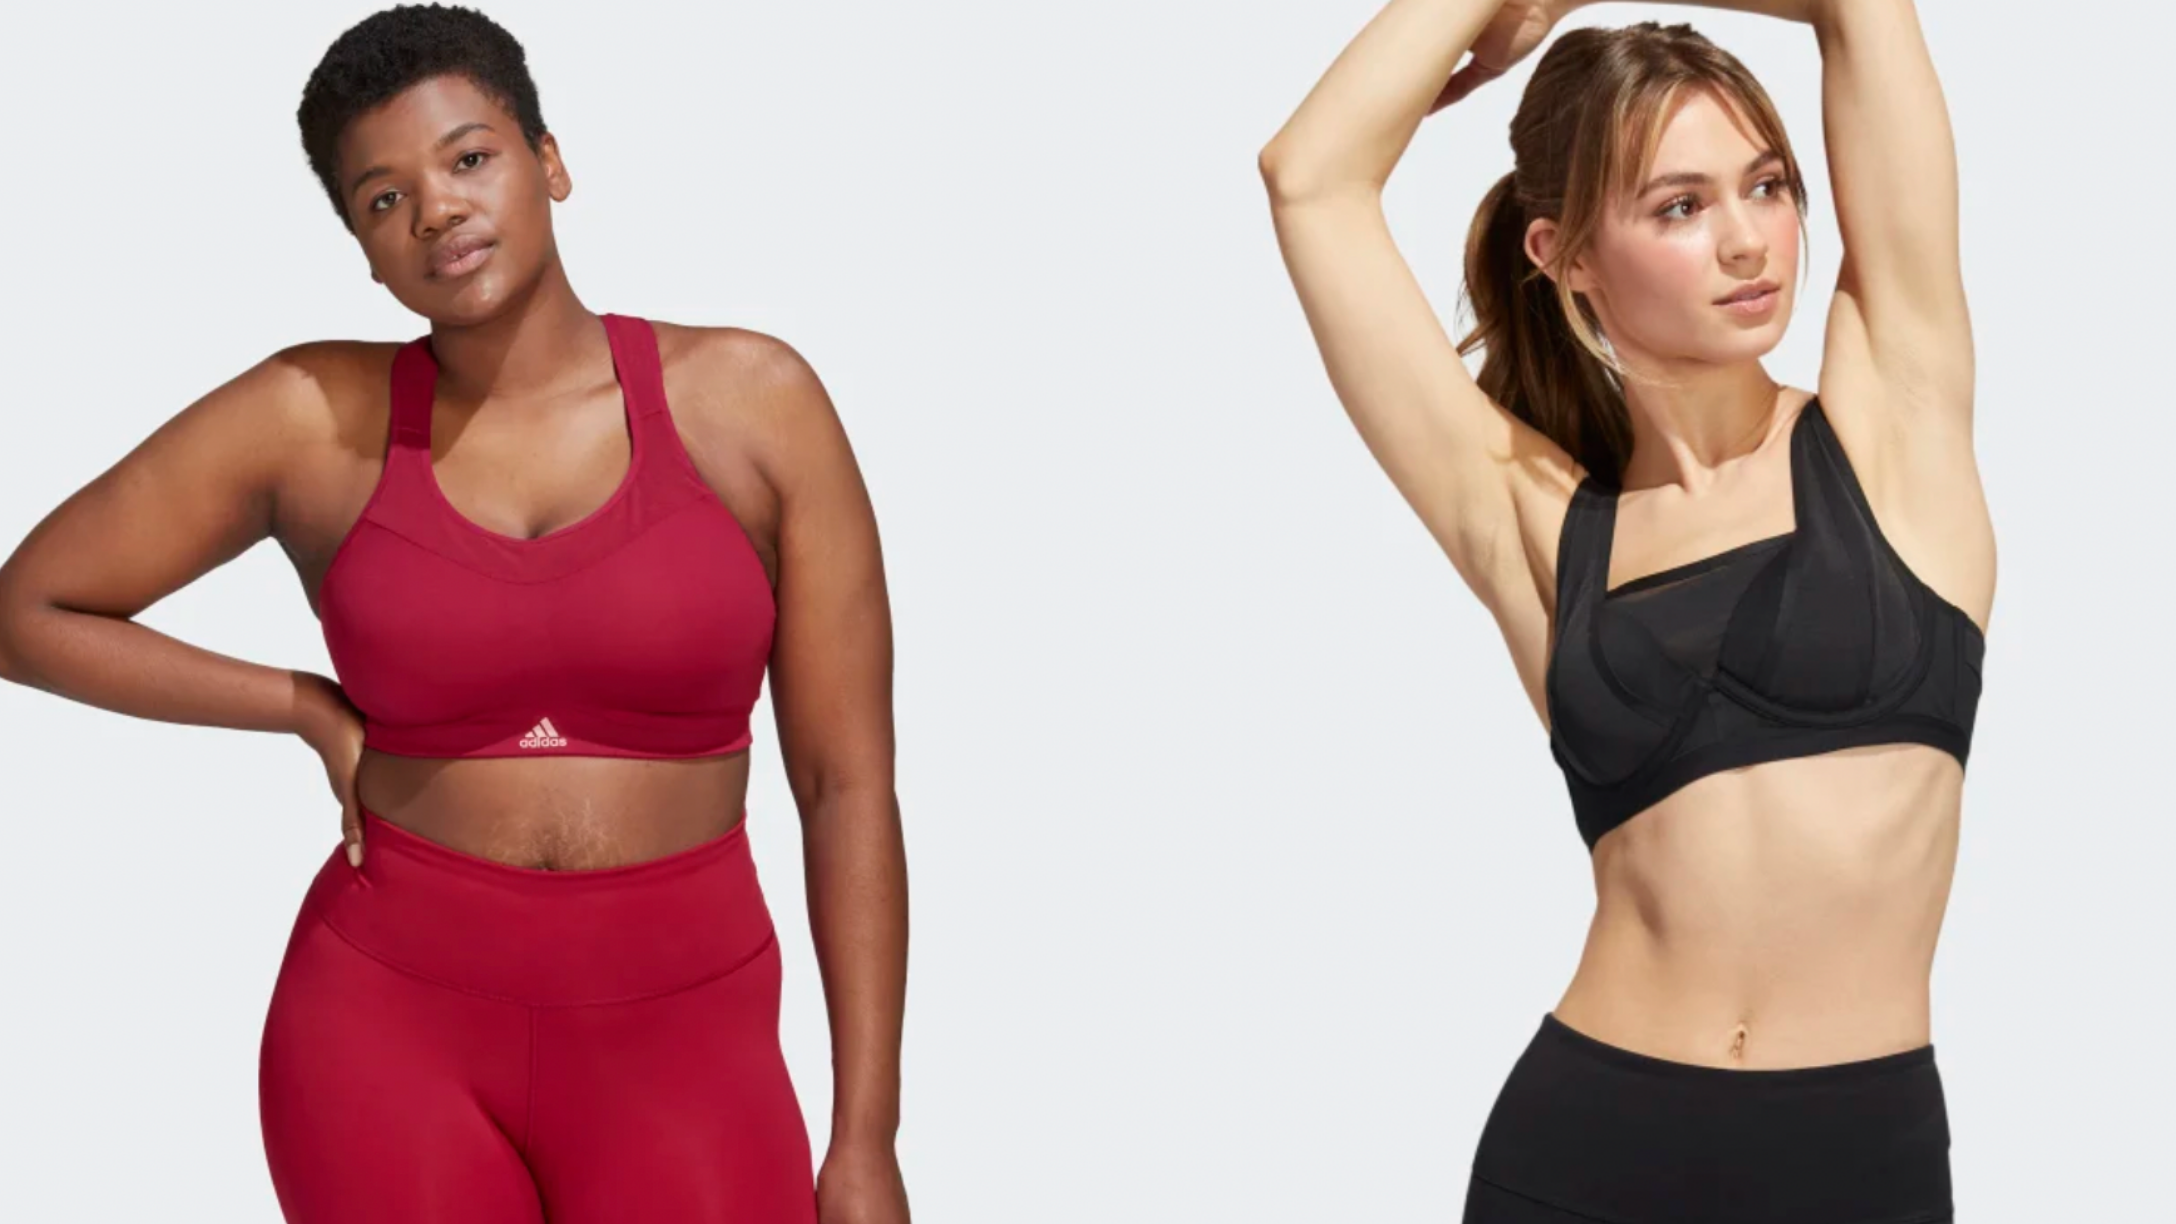 Adidas Launches New Bra Line With Campaign Full of Bare Boobs & Everyone  Has an Opinion